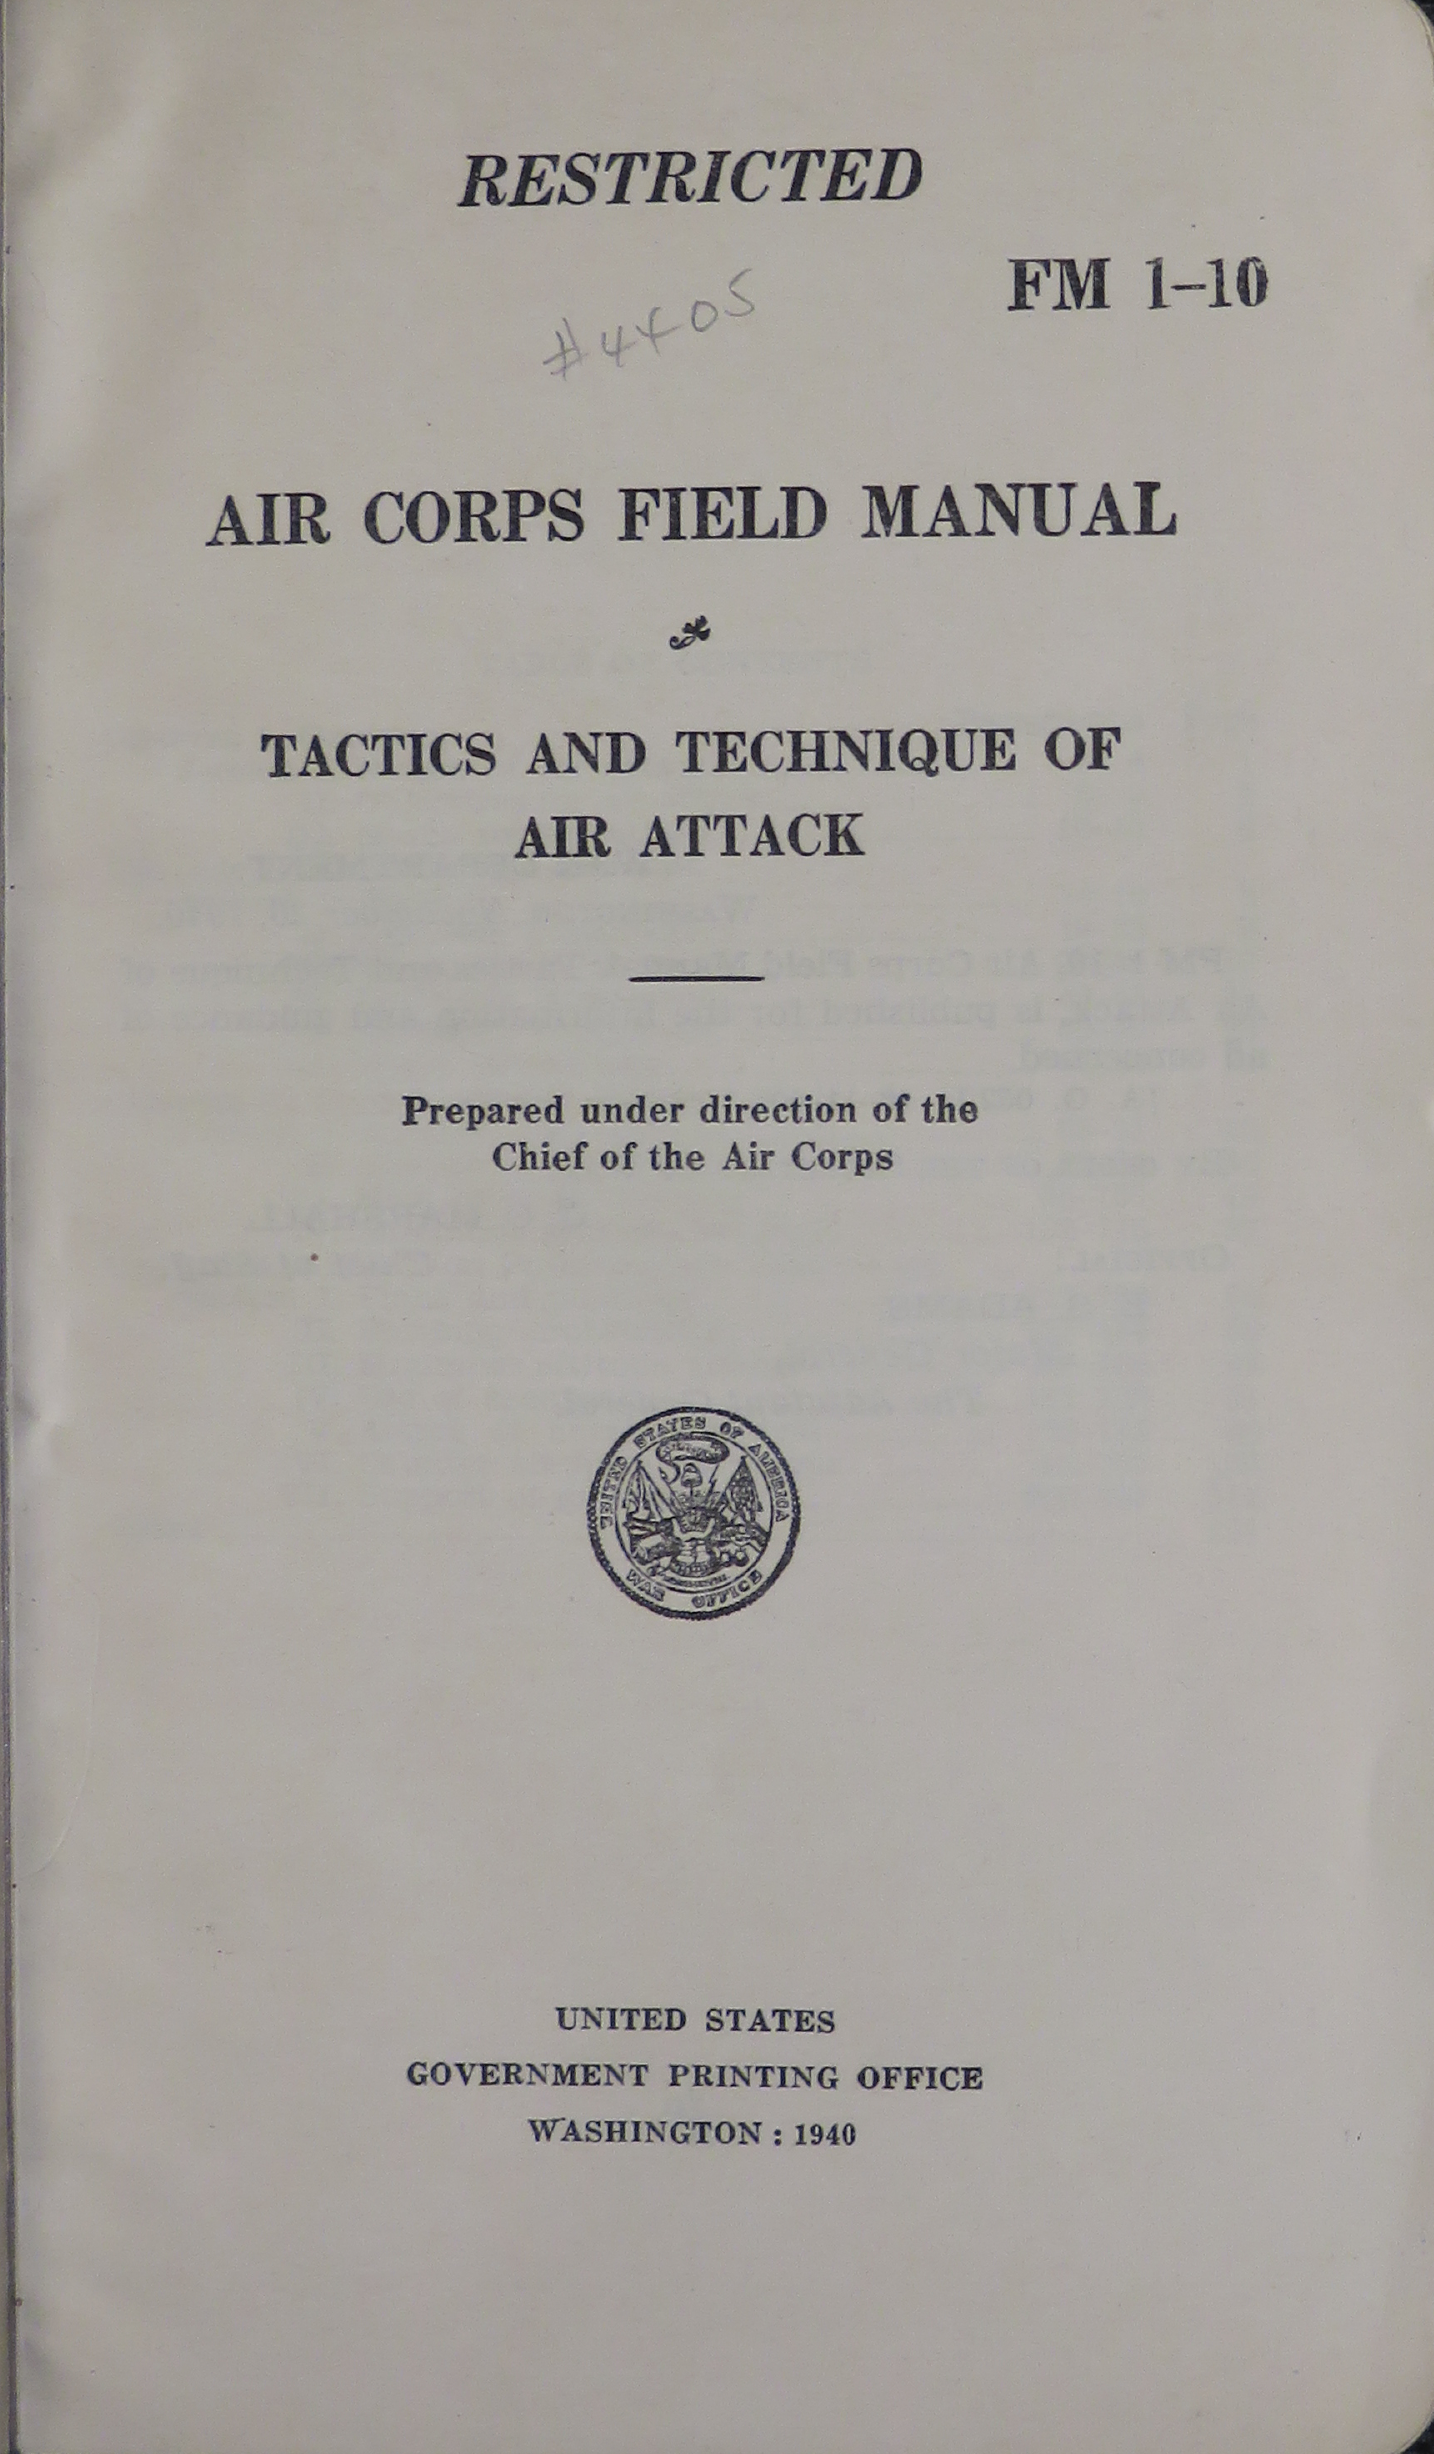 Sample page 3 from AirCorps Library document: Air Corps Field Manual for Tactics and Technique of air Attack